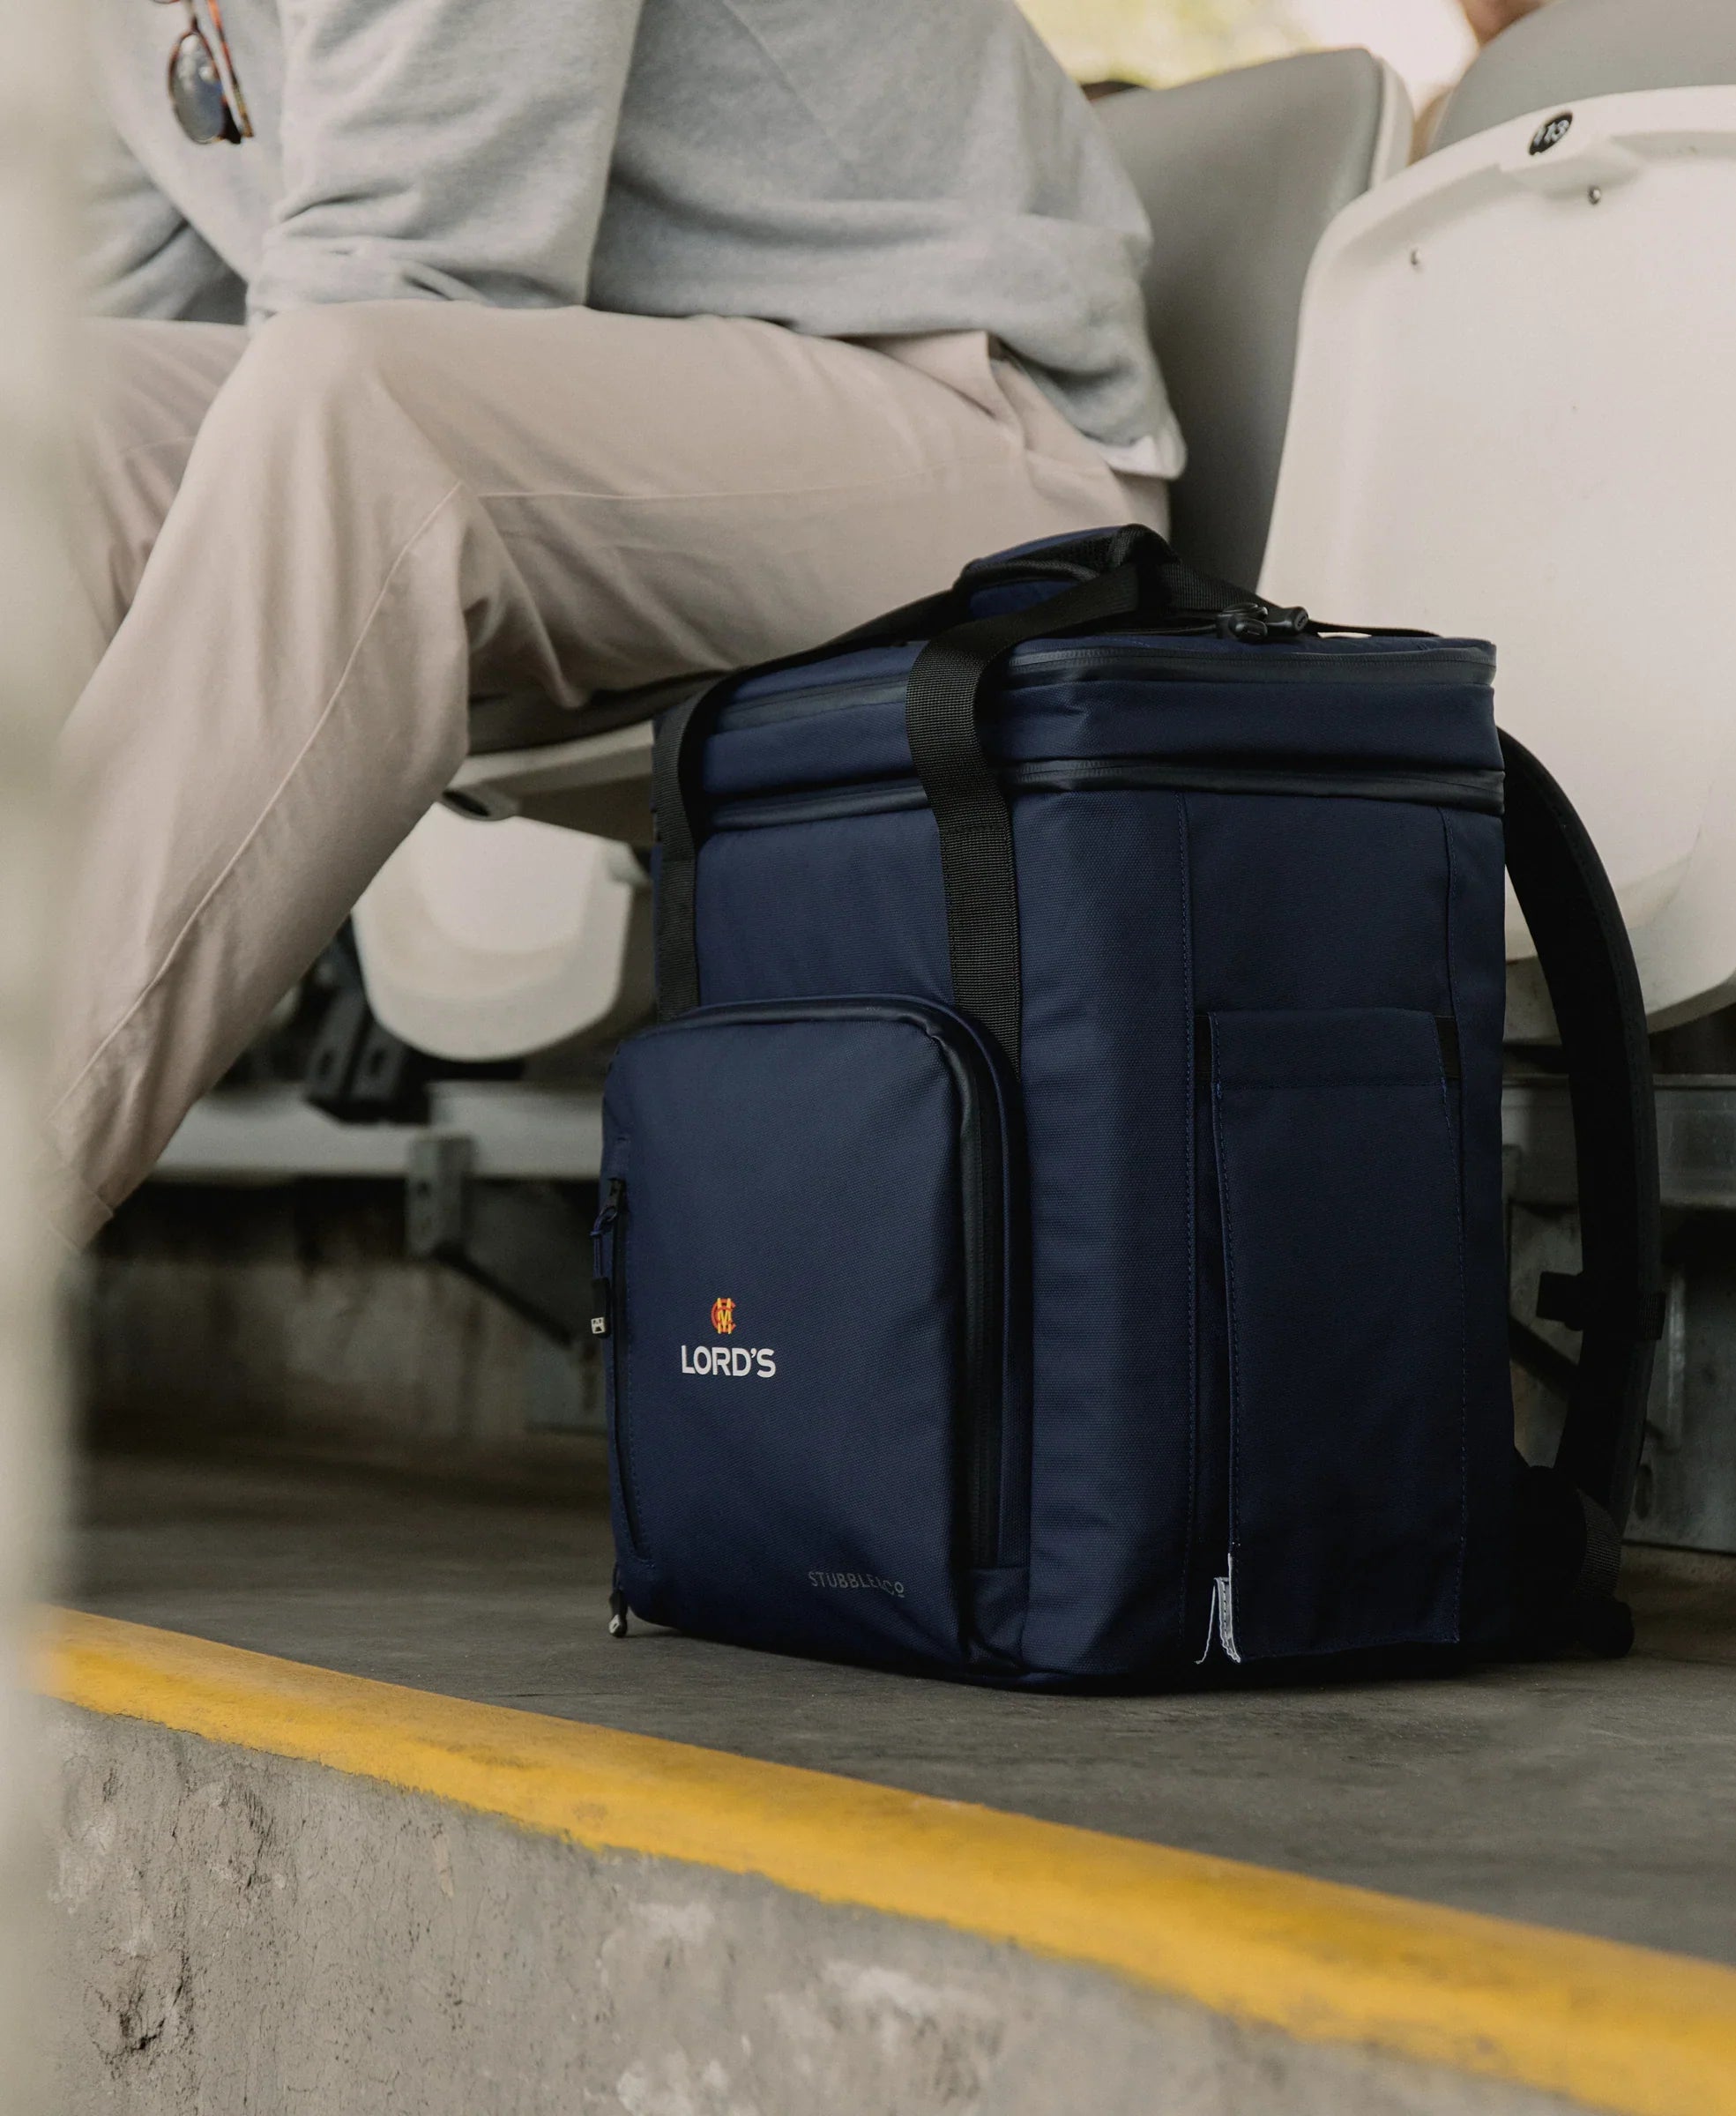 Navy cooler backpack at Lords cricket ground